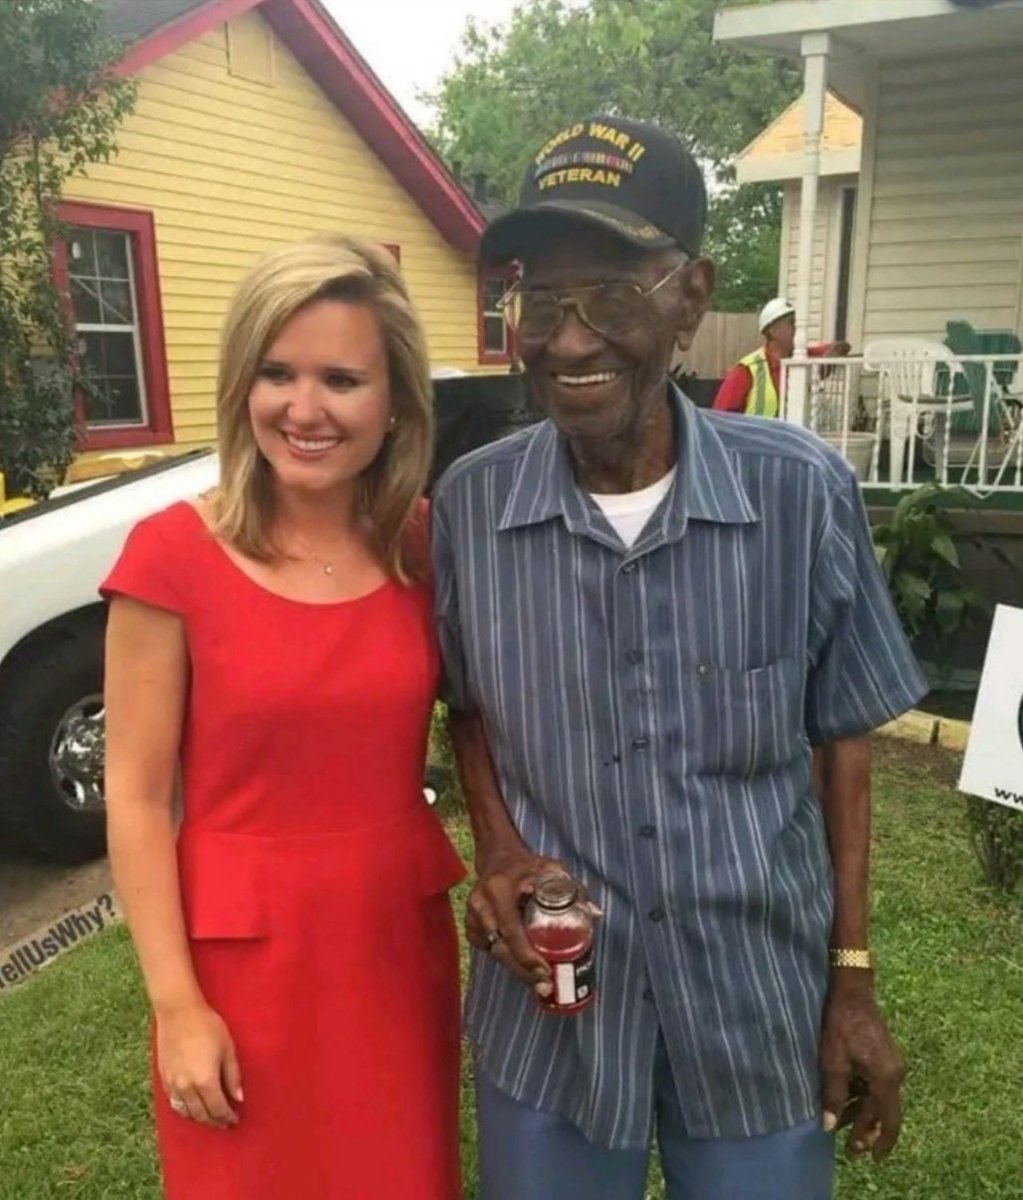 Let's honor Richard Overton, the former oldest living WWII combat veteran who lived to the incredible age of 112. He was a true American hero. ❤️